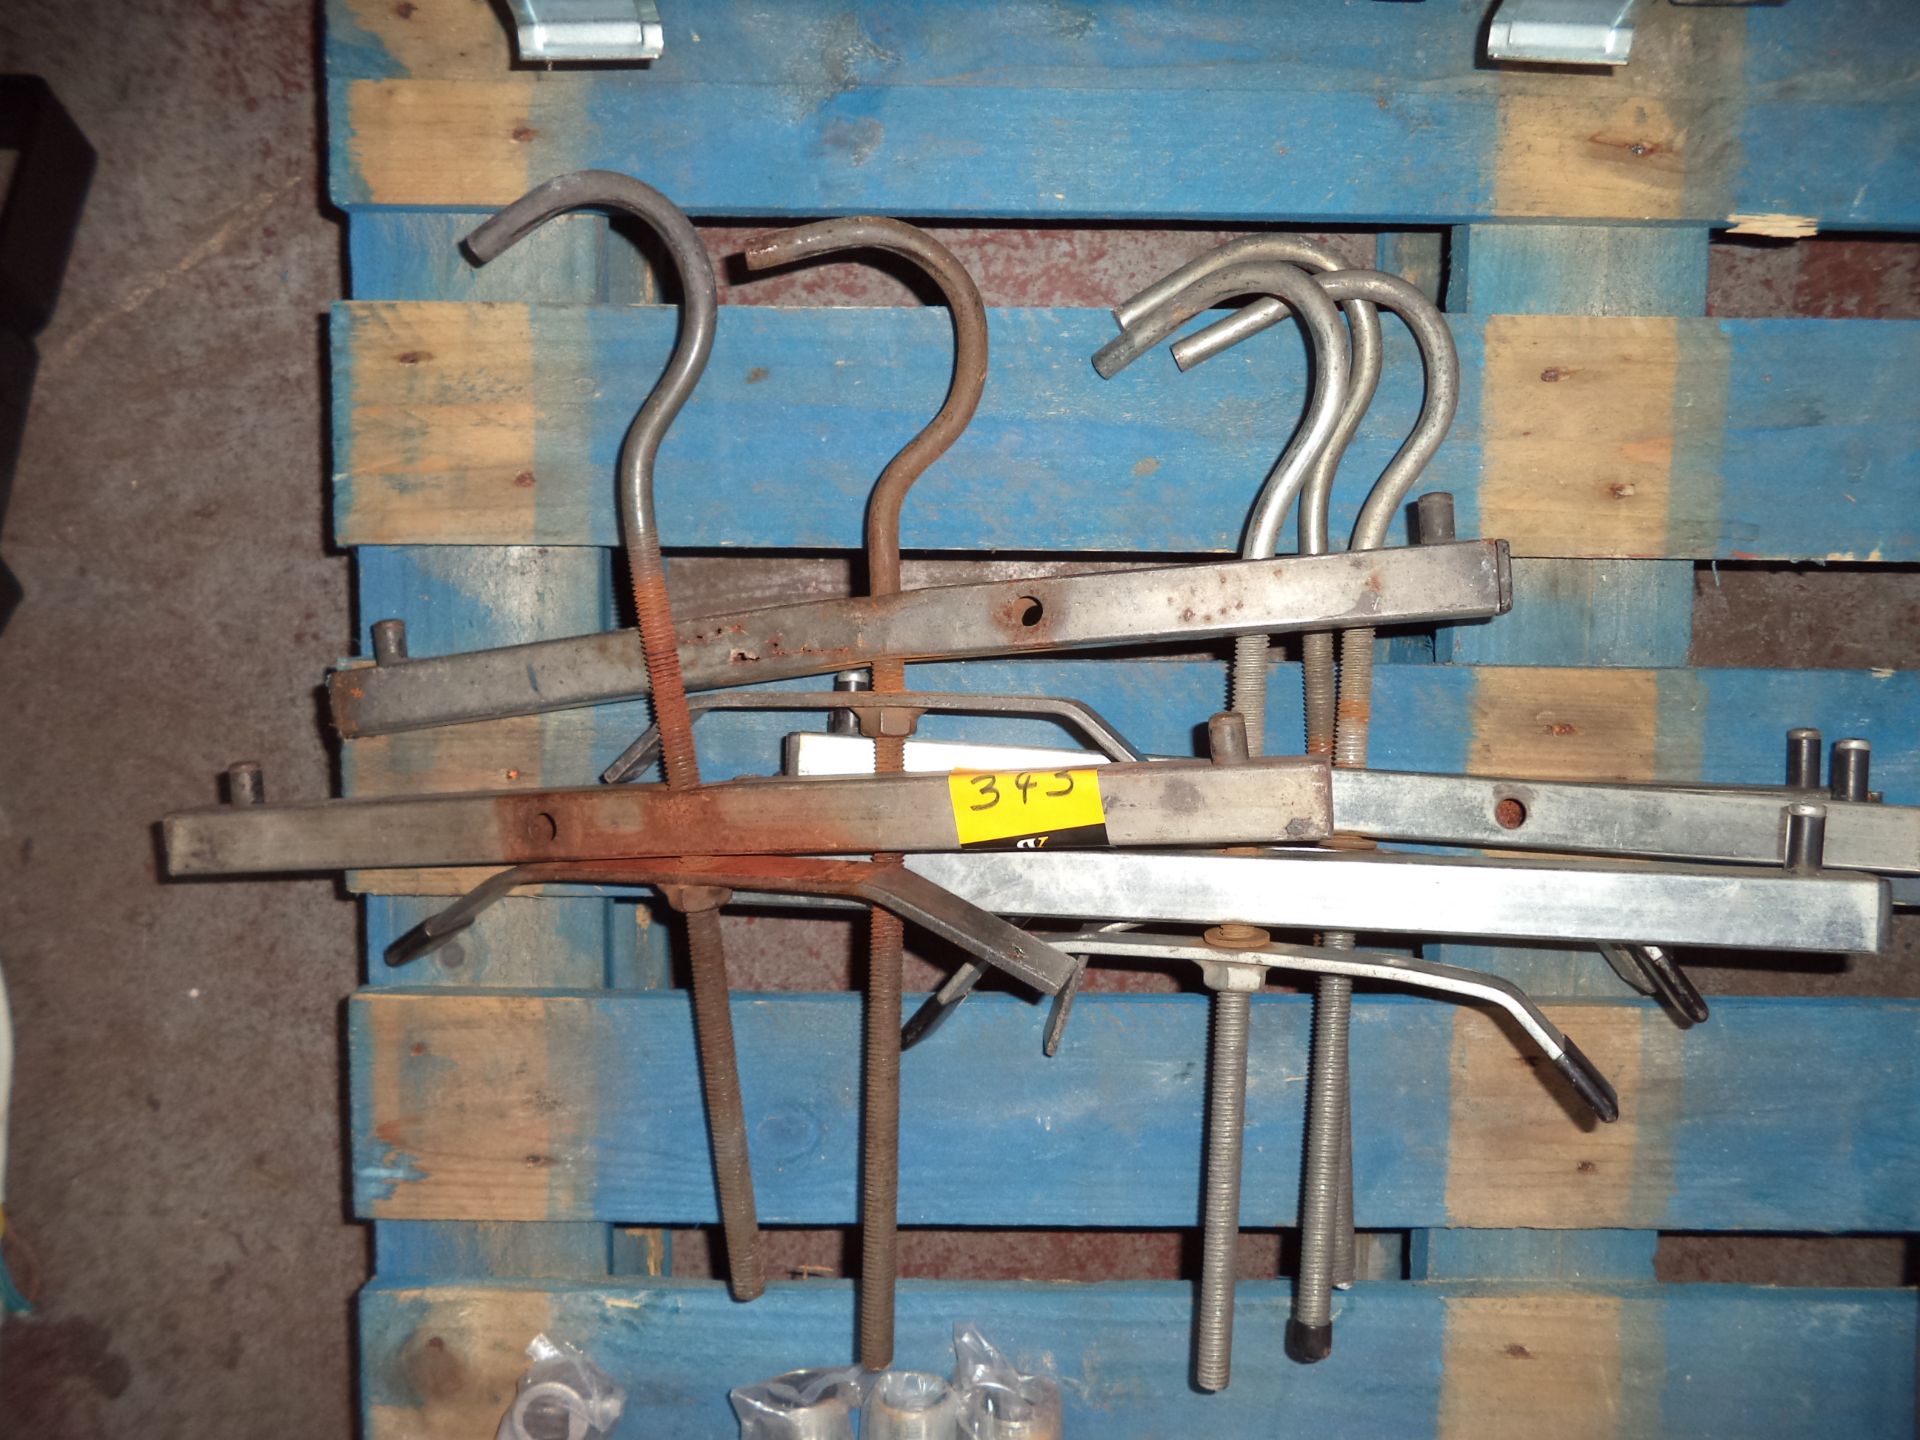 5 off ladder clamps IMPORTANT: Please remember goods successfully bid upon must be paid for and - Image 2 of 2